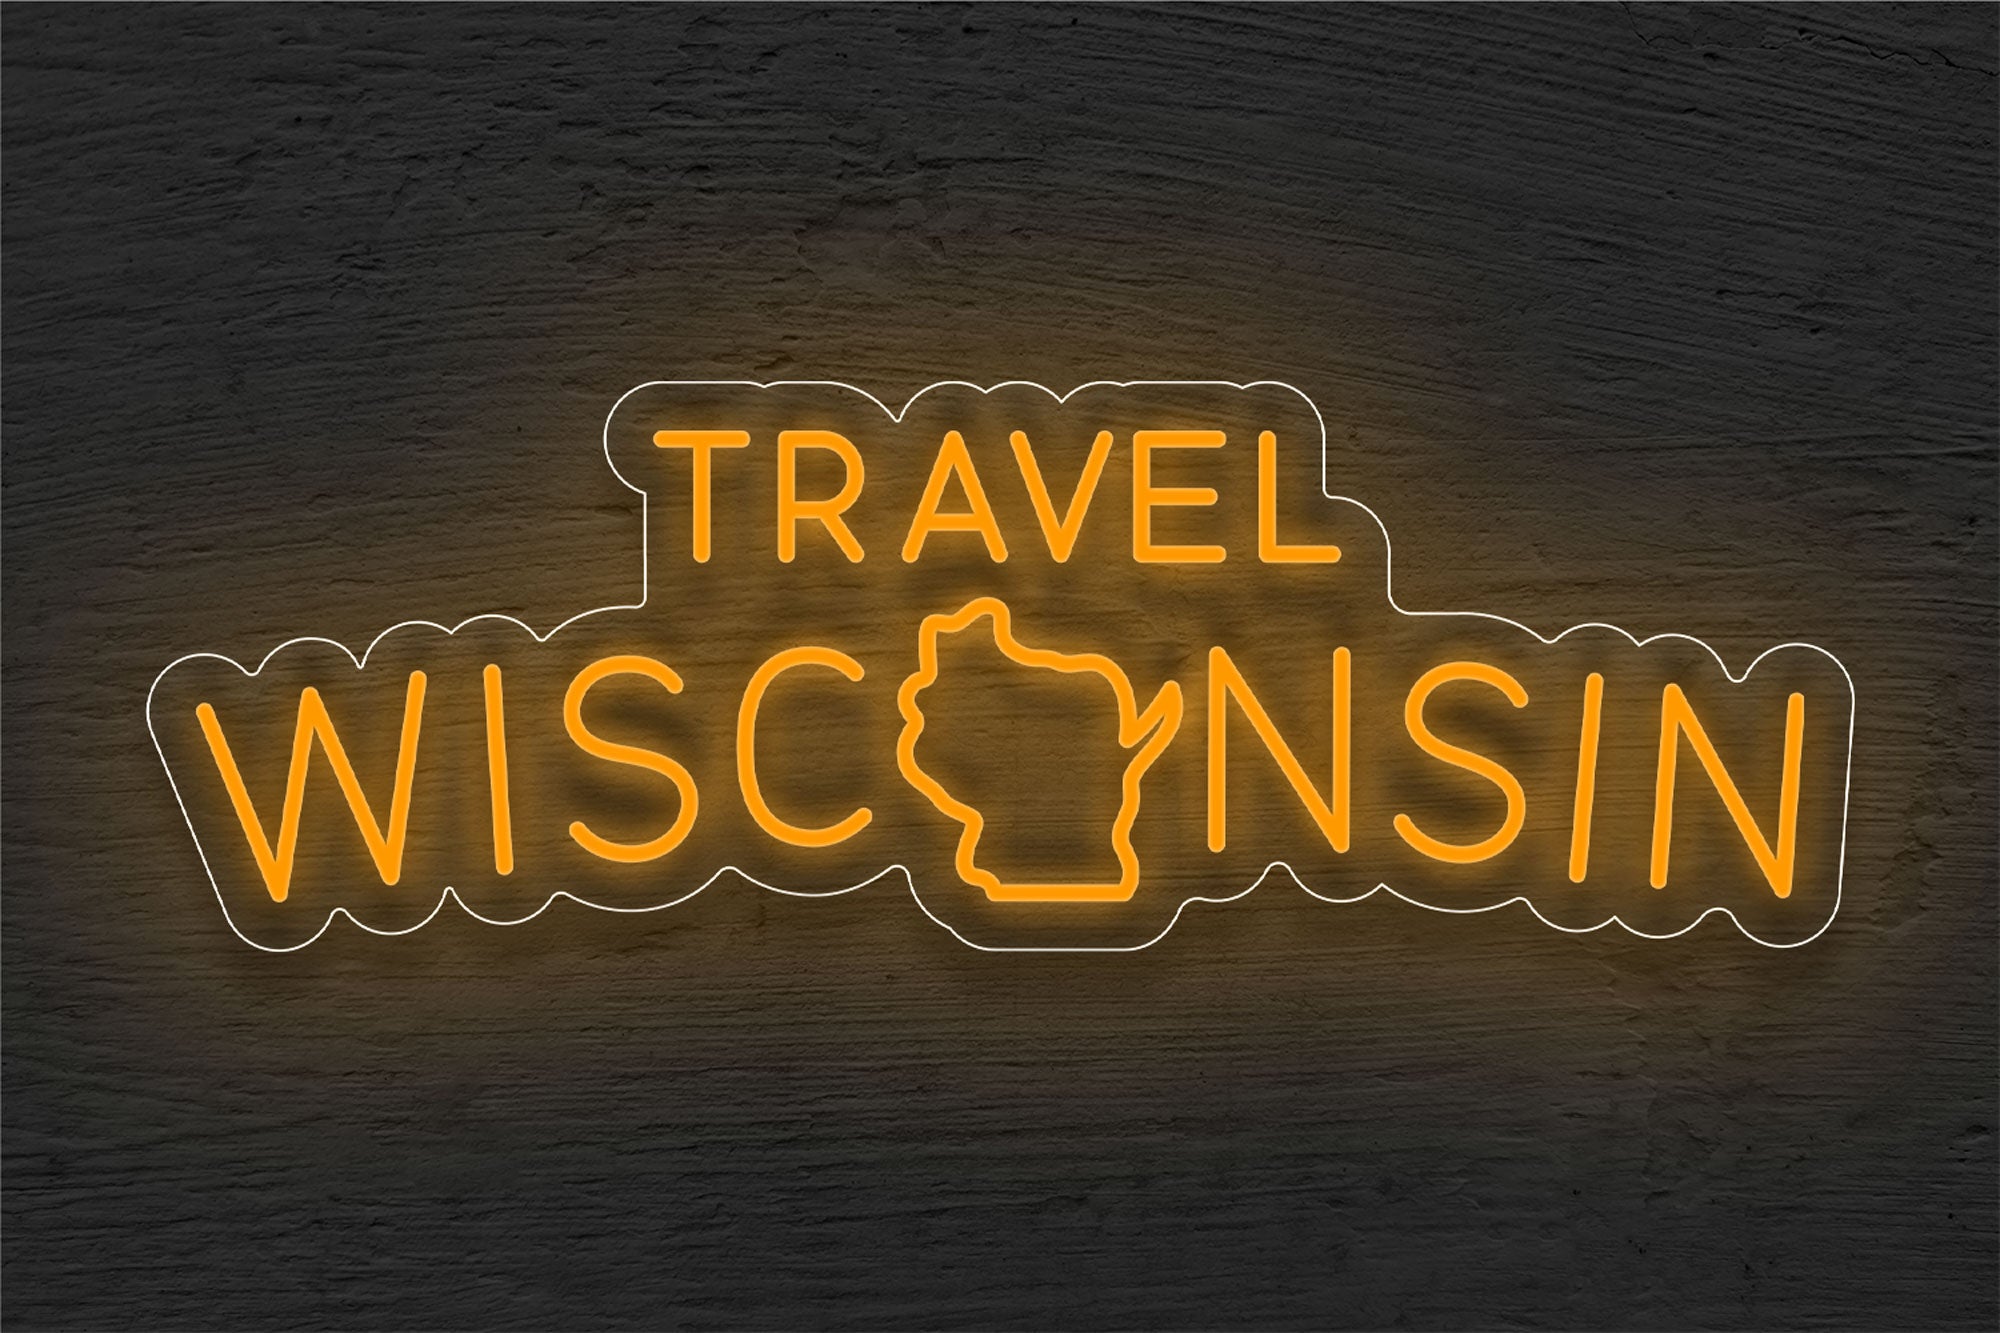 Travel Wisconsin with Logo LED Neon Sign